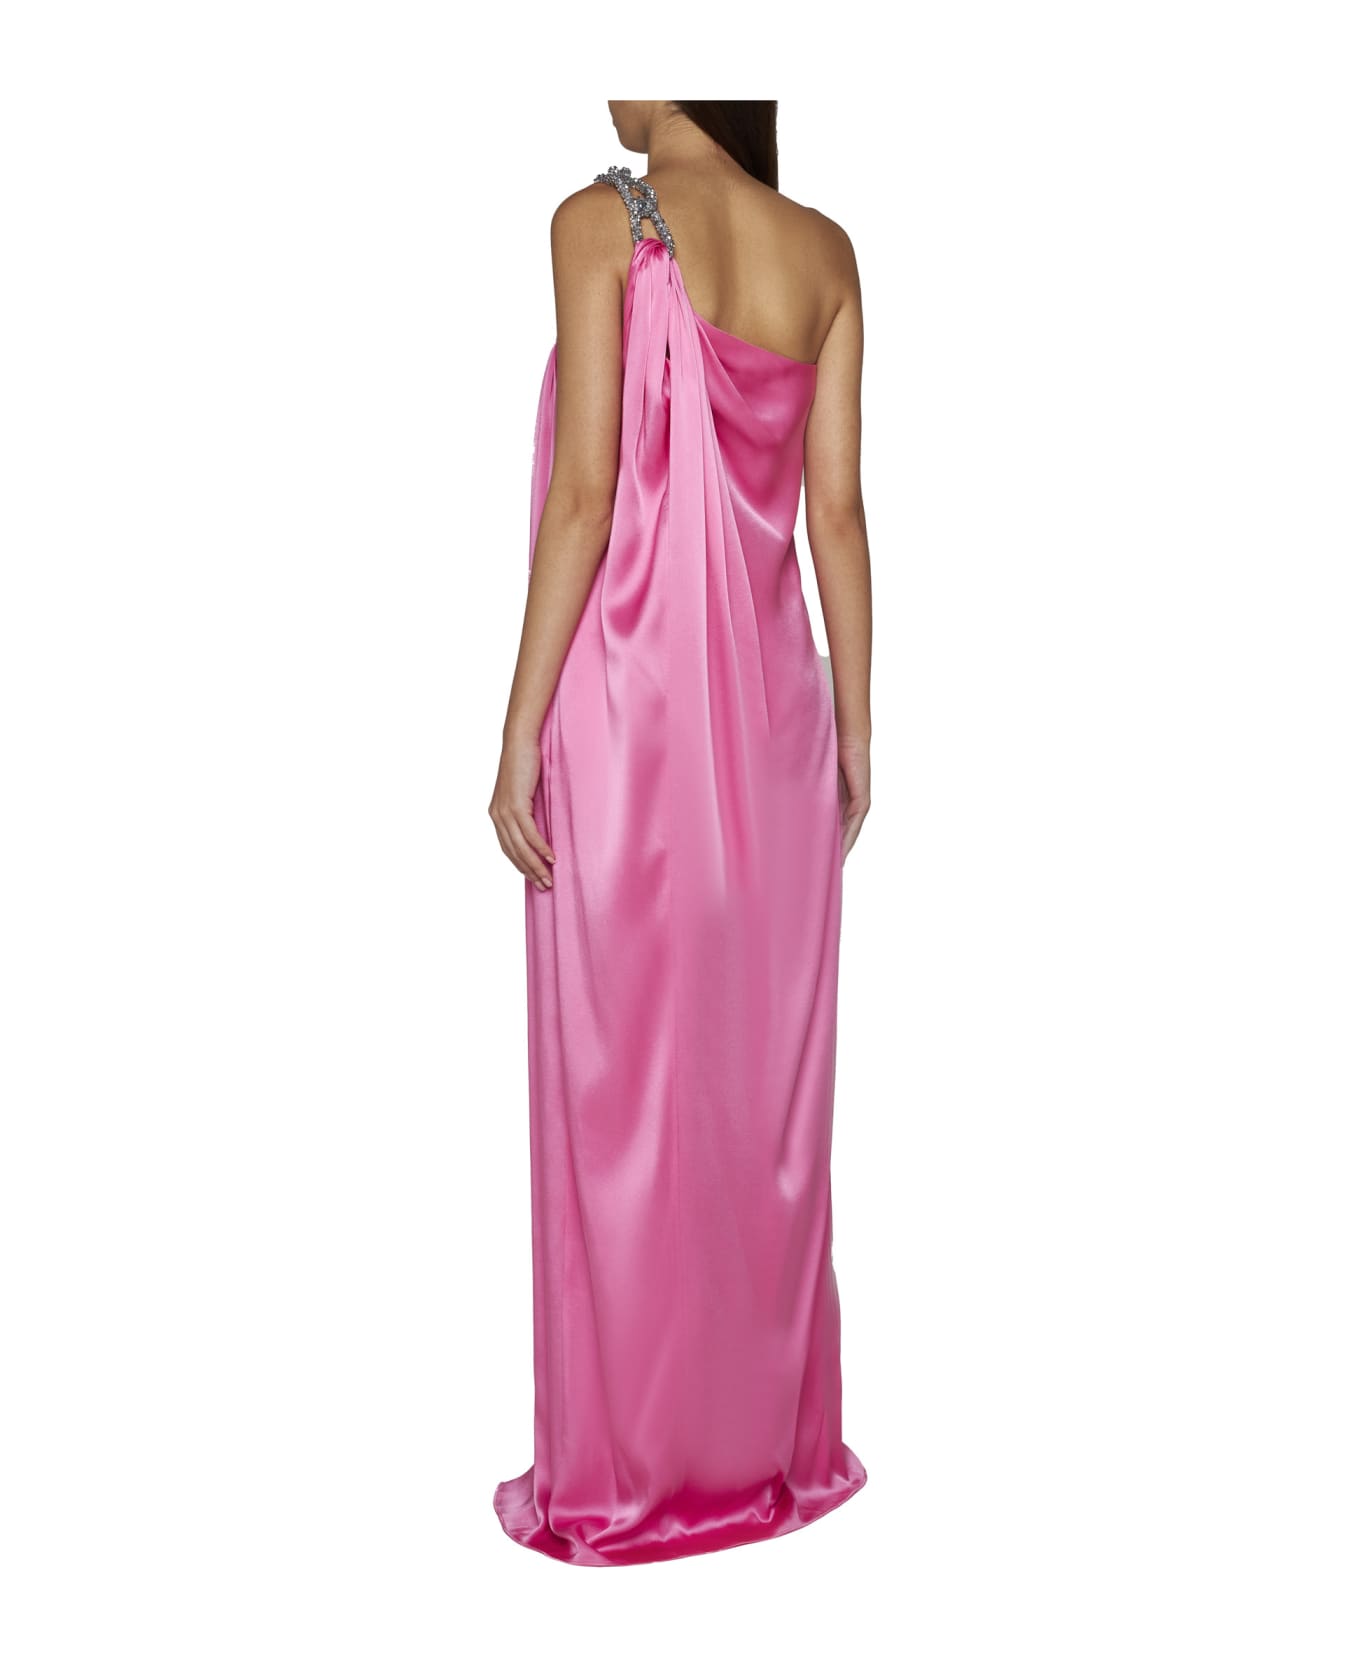 Stella McCartney One-shoulder Maxi Dress With Crystal Chain In Double Satin - Bright Pink